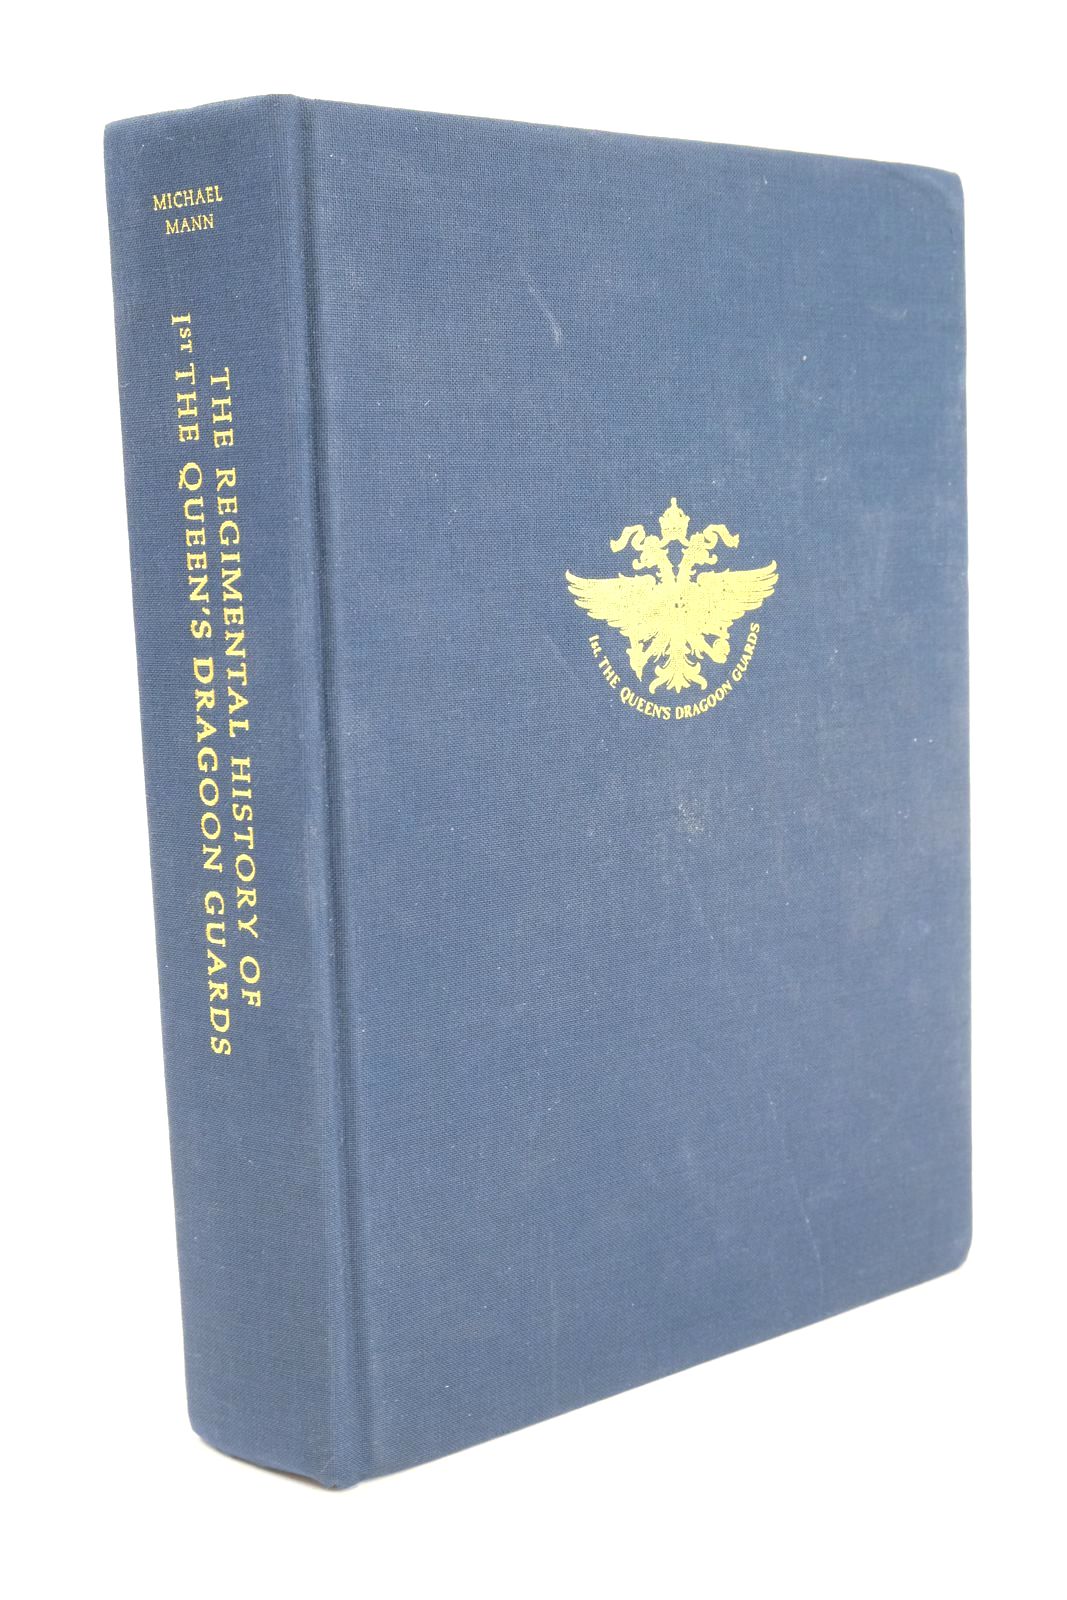 Photo of THE REGIMENTAL HISTORY OF 1ST THE QUEEN'S DRAGOON GUARDS- Stock Number: 1324932